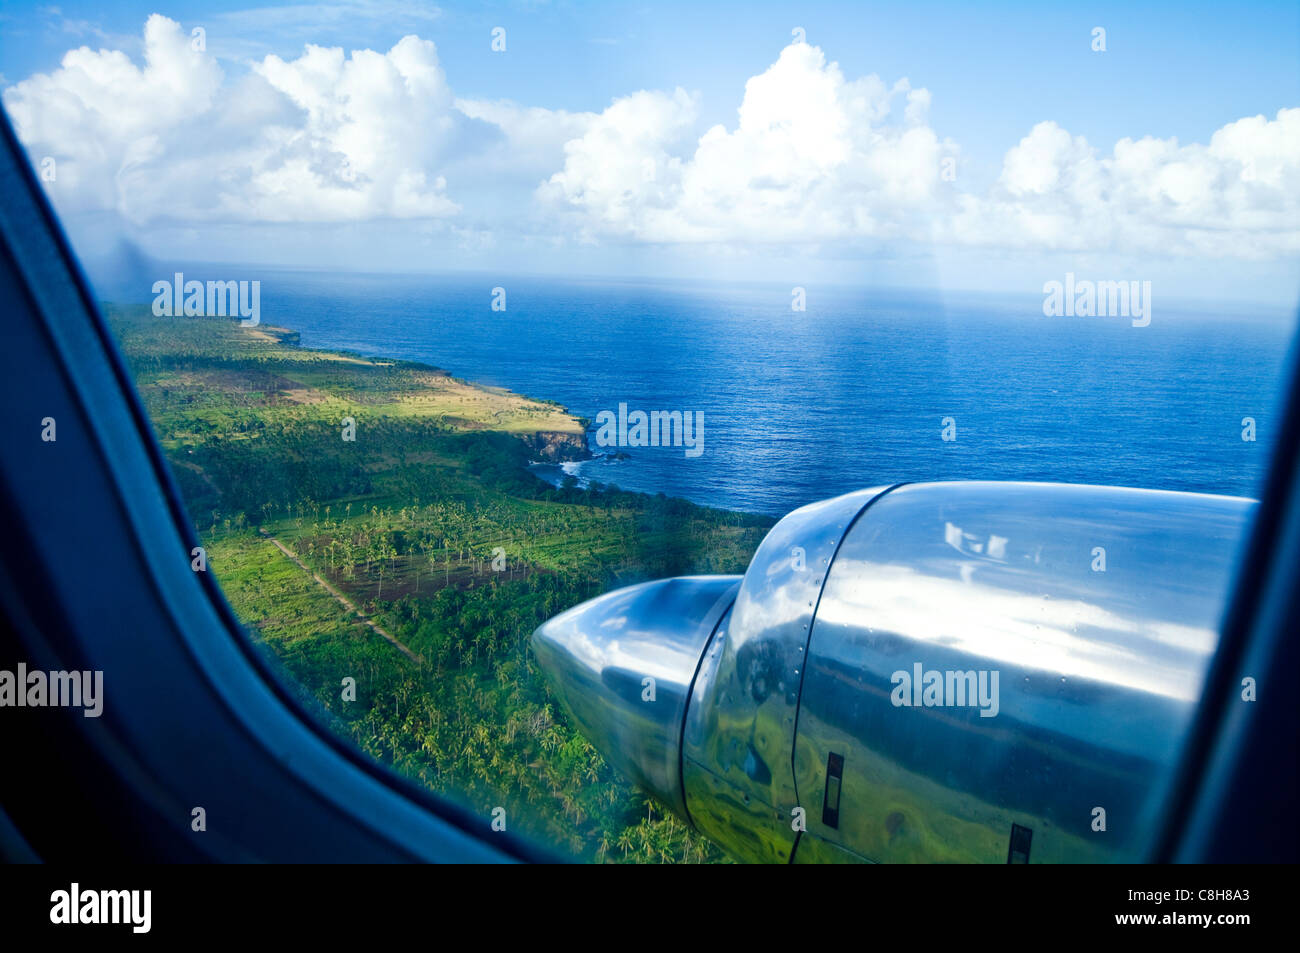 A chrome engine and propellor of a plane flying over tropical islands. Stock Photo